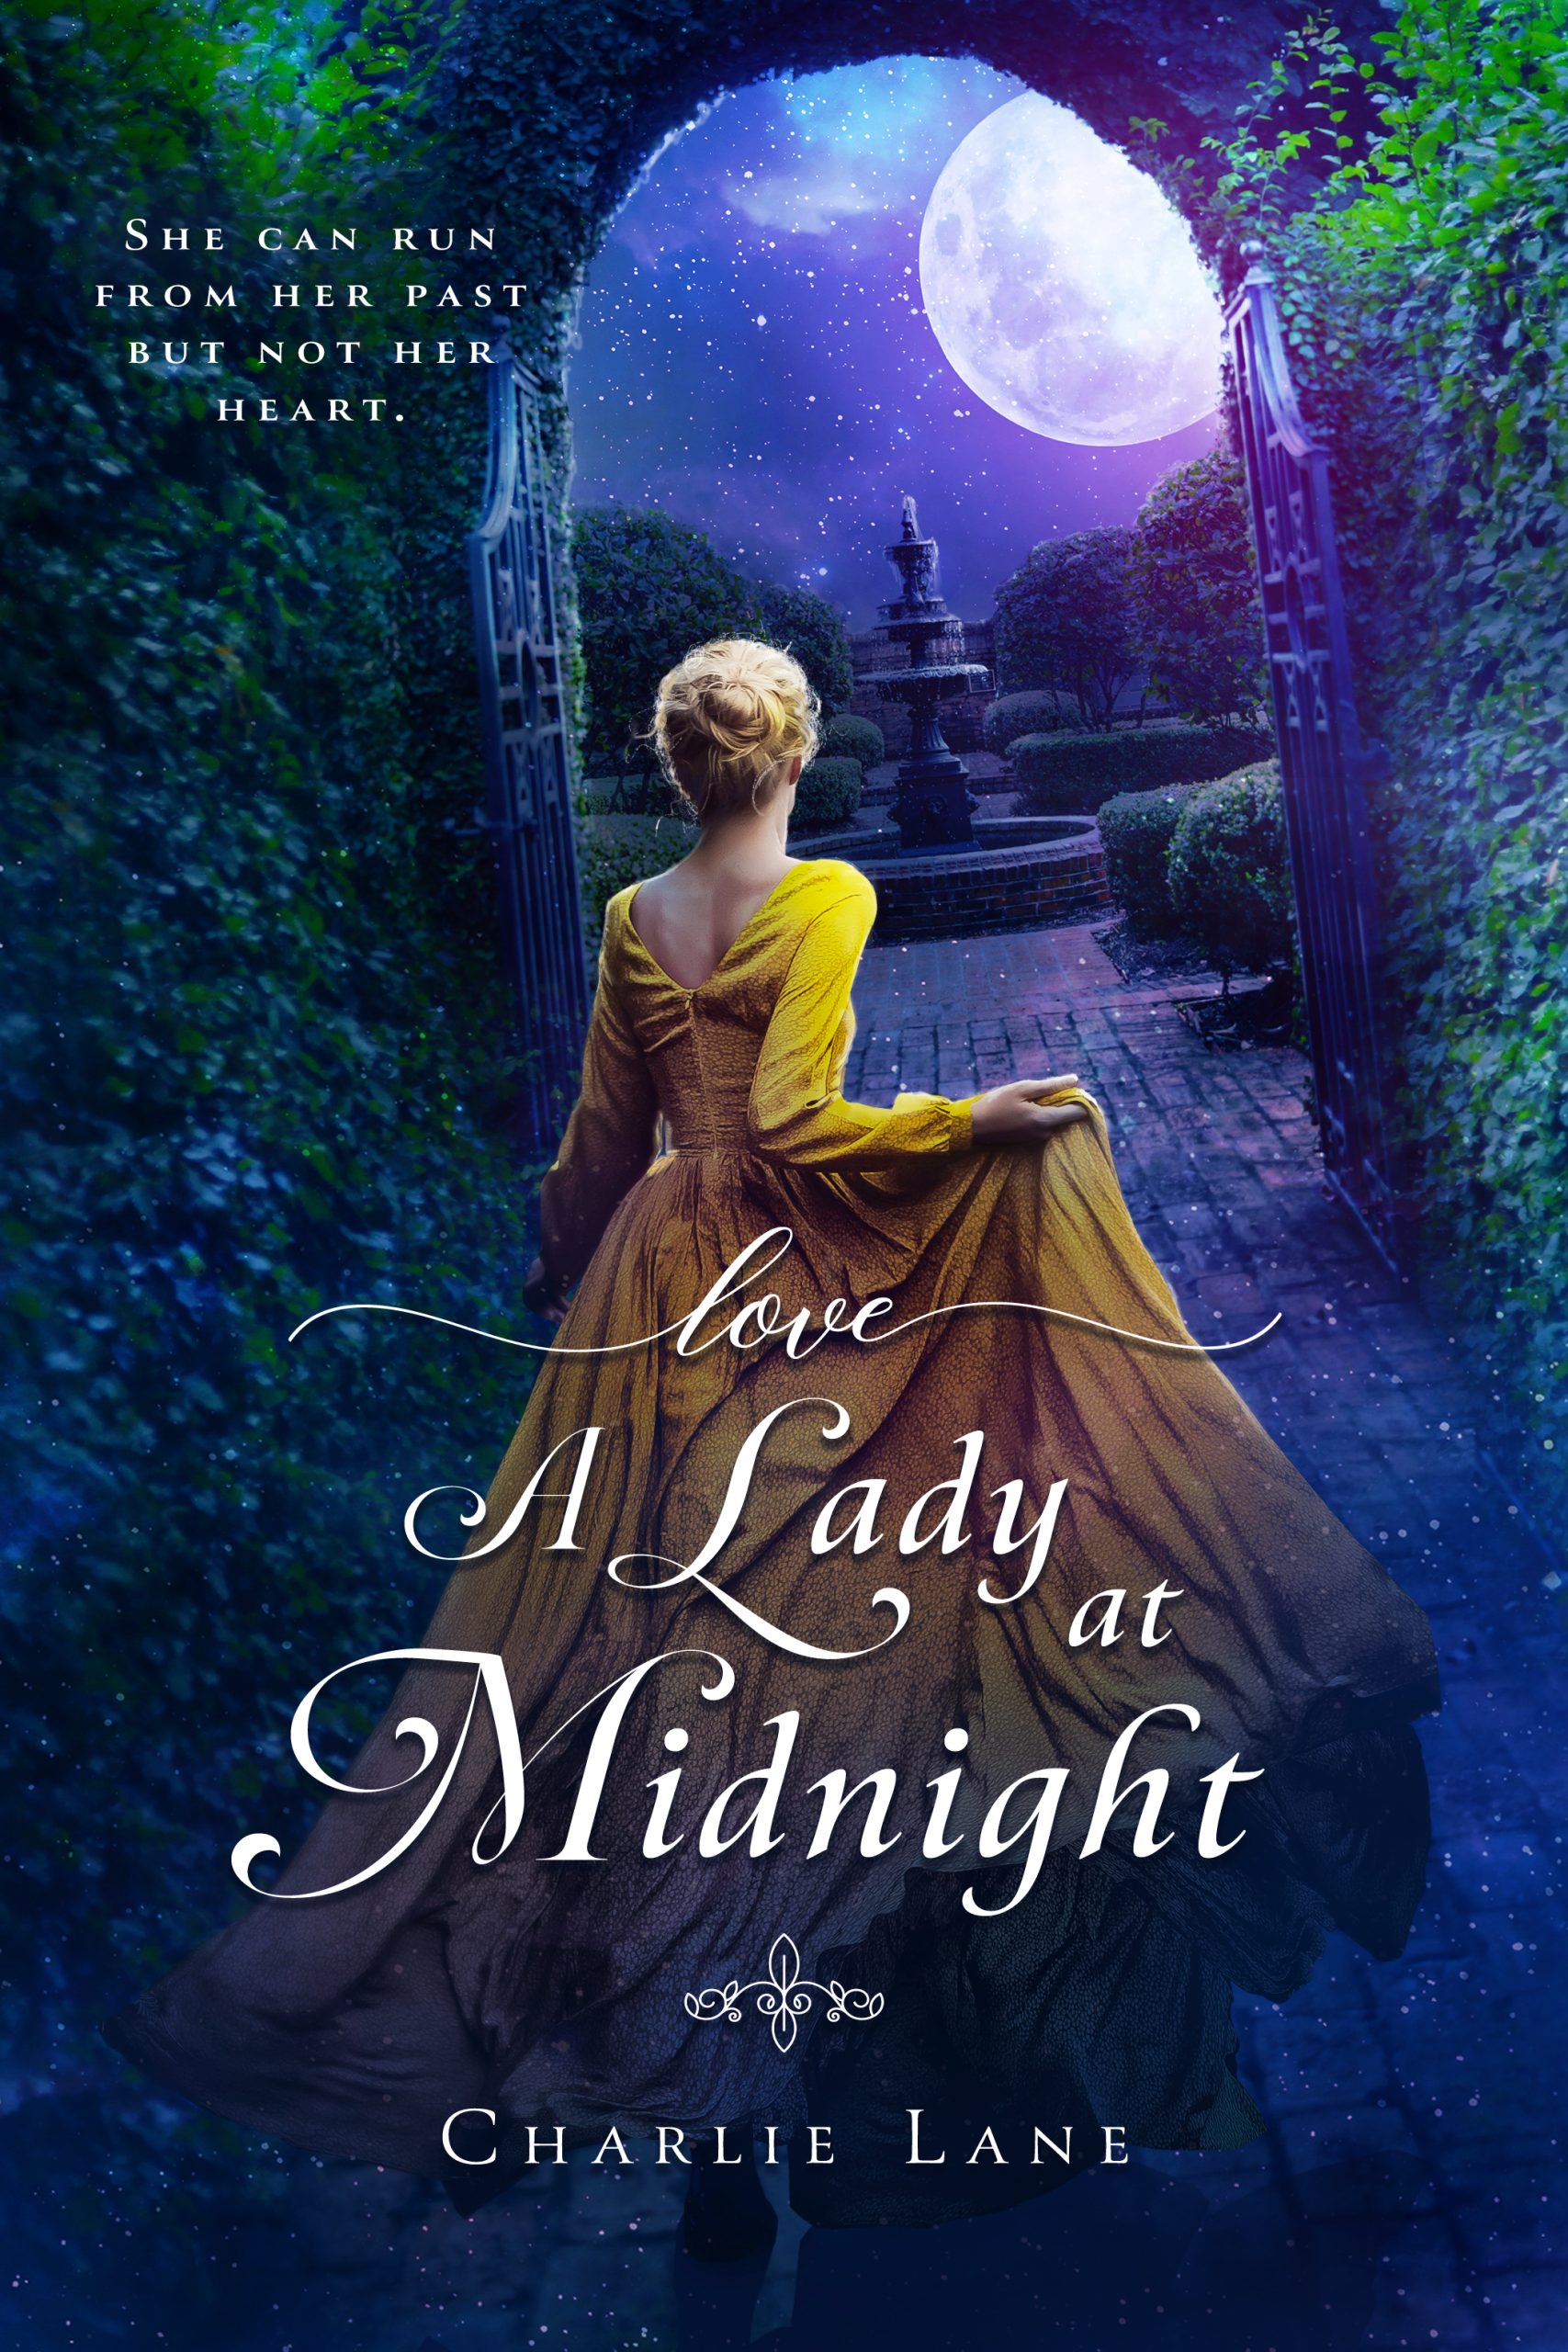 Love a Lady at Midnight by Charlie Lane PDF DownloadLove a Lady at Midnight by Charlie Lane PDF Download